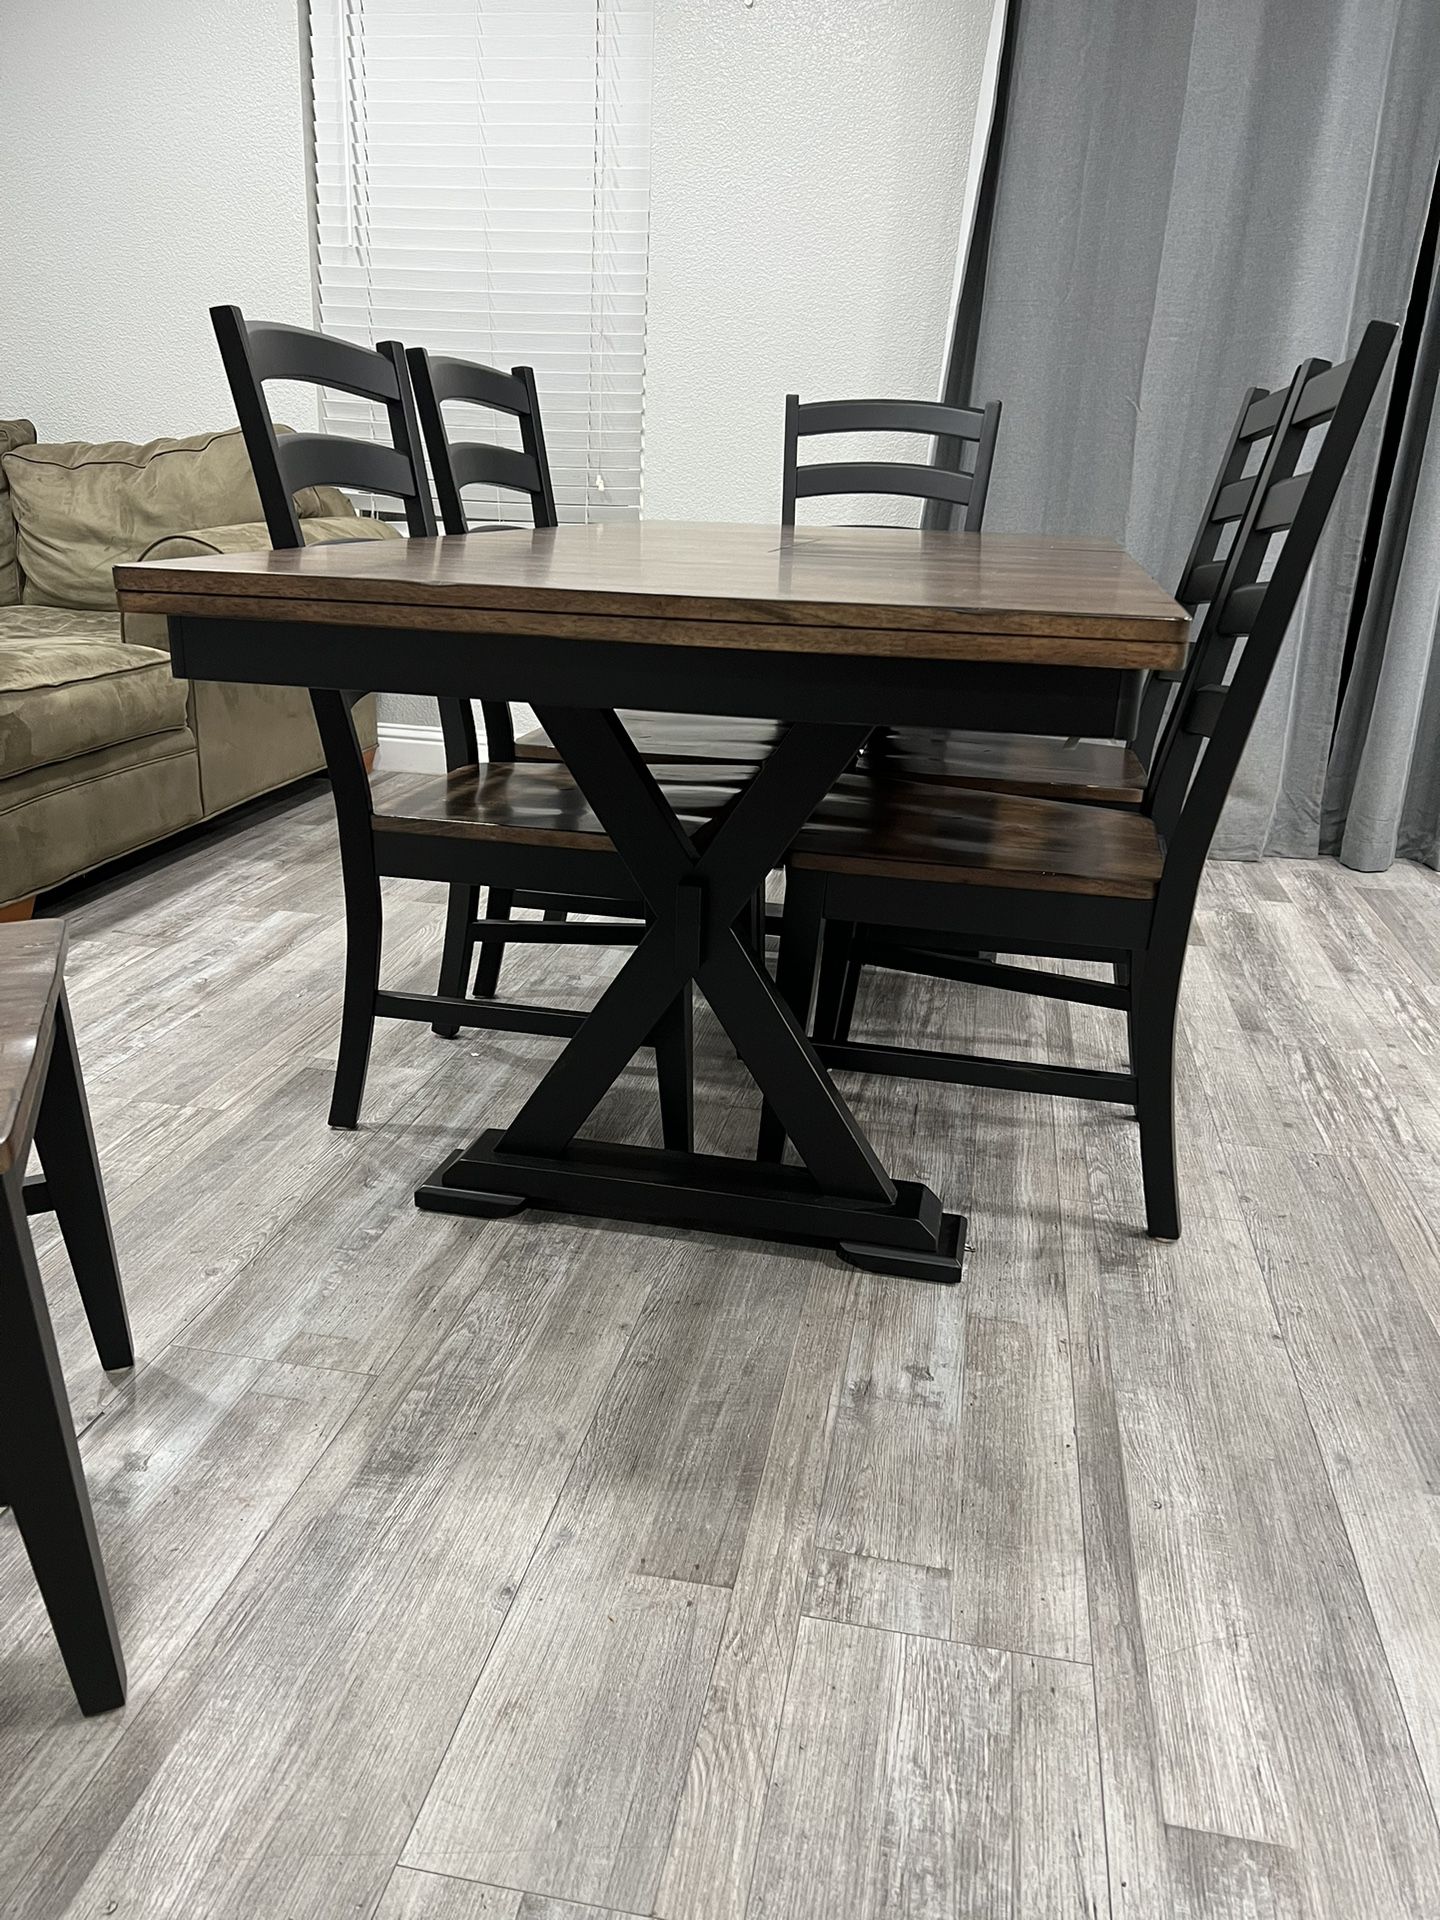 Dining Table And Chairs Wood Table With 6 Chairs ! Kitchen Table ! Table With Leaf ! Free Delivery 